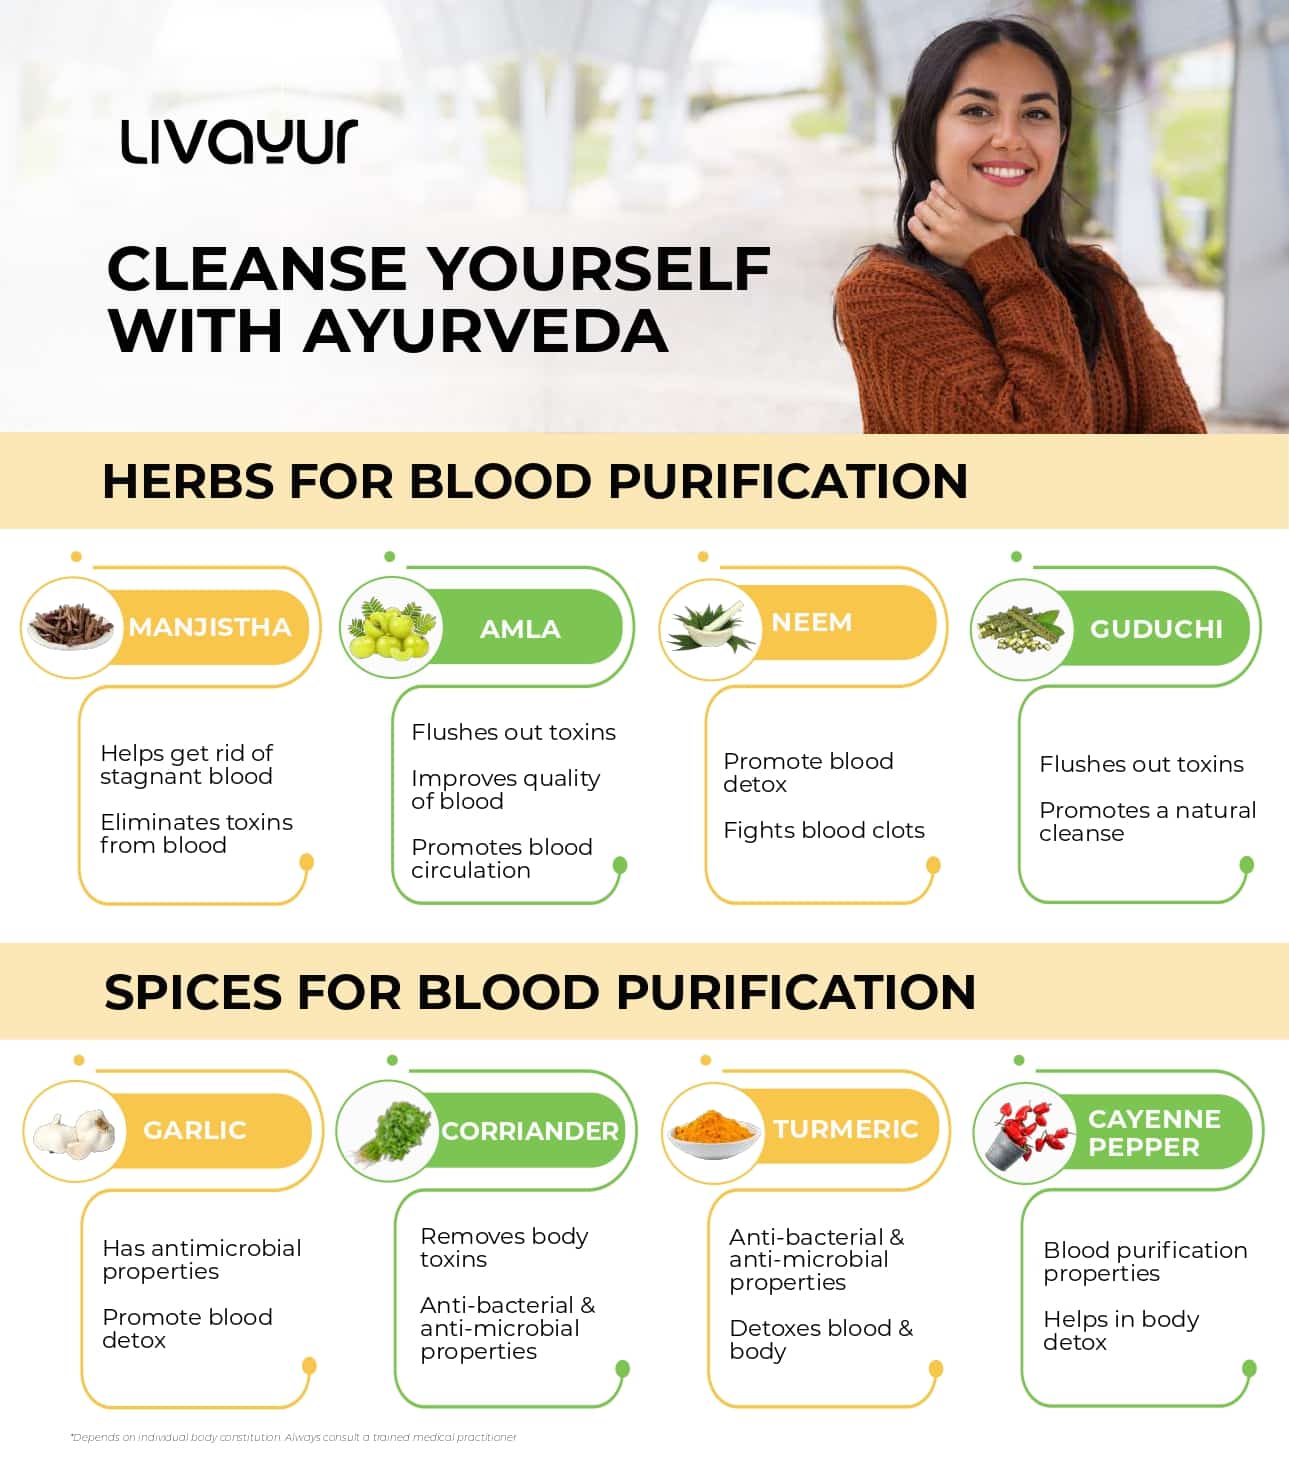 Cleanse Yourself With Ayurveda